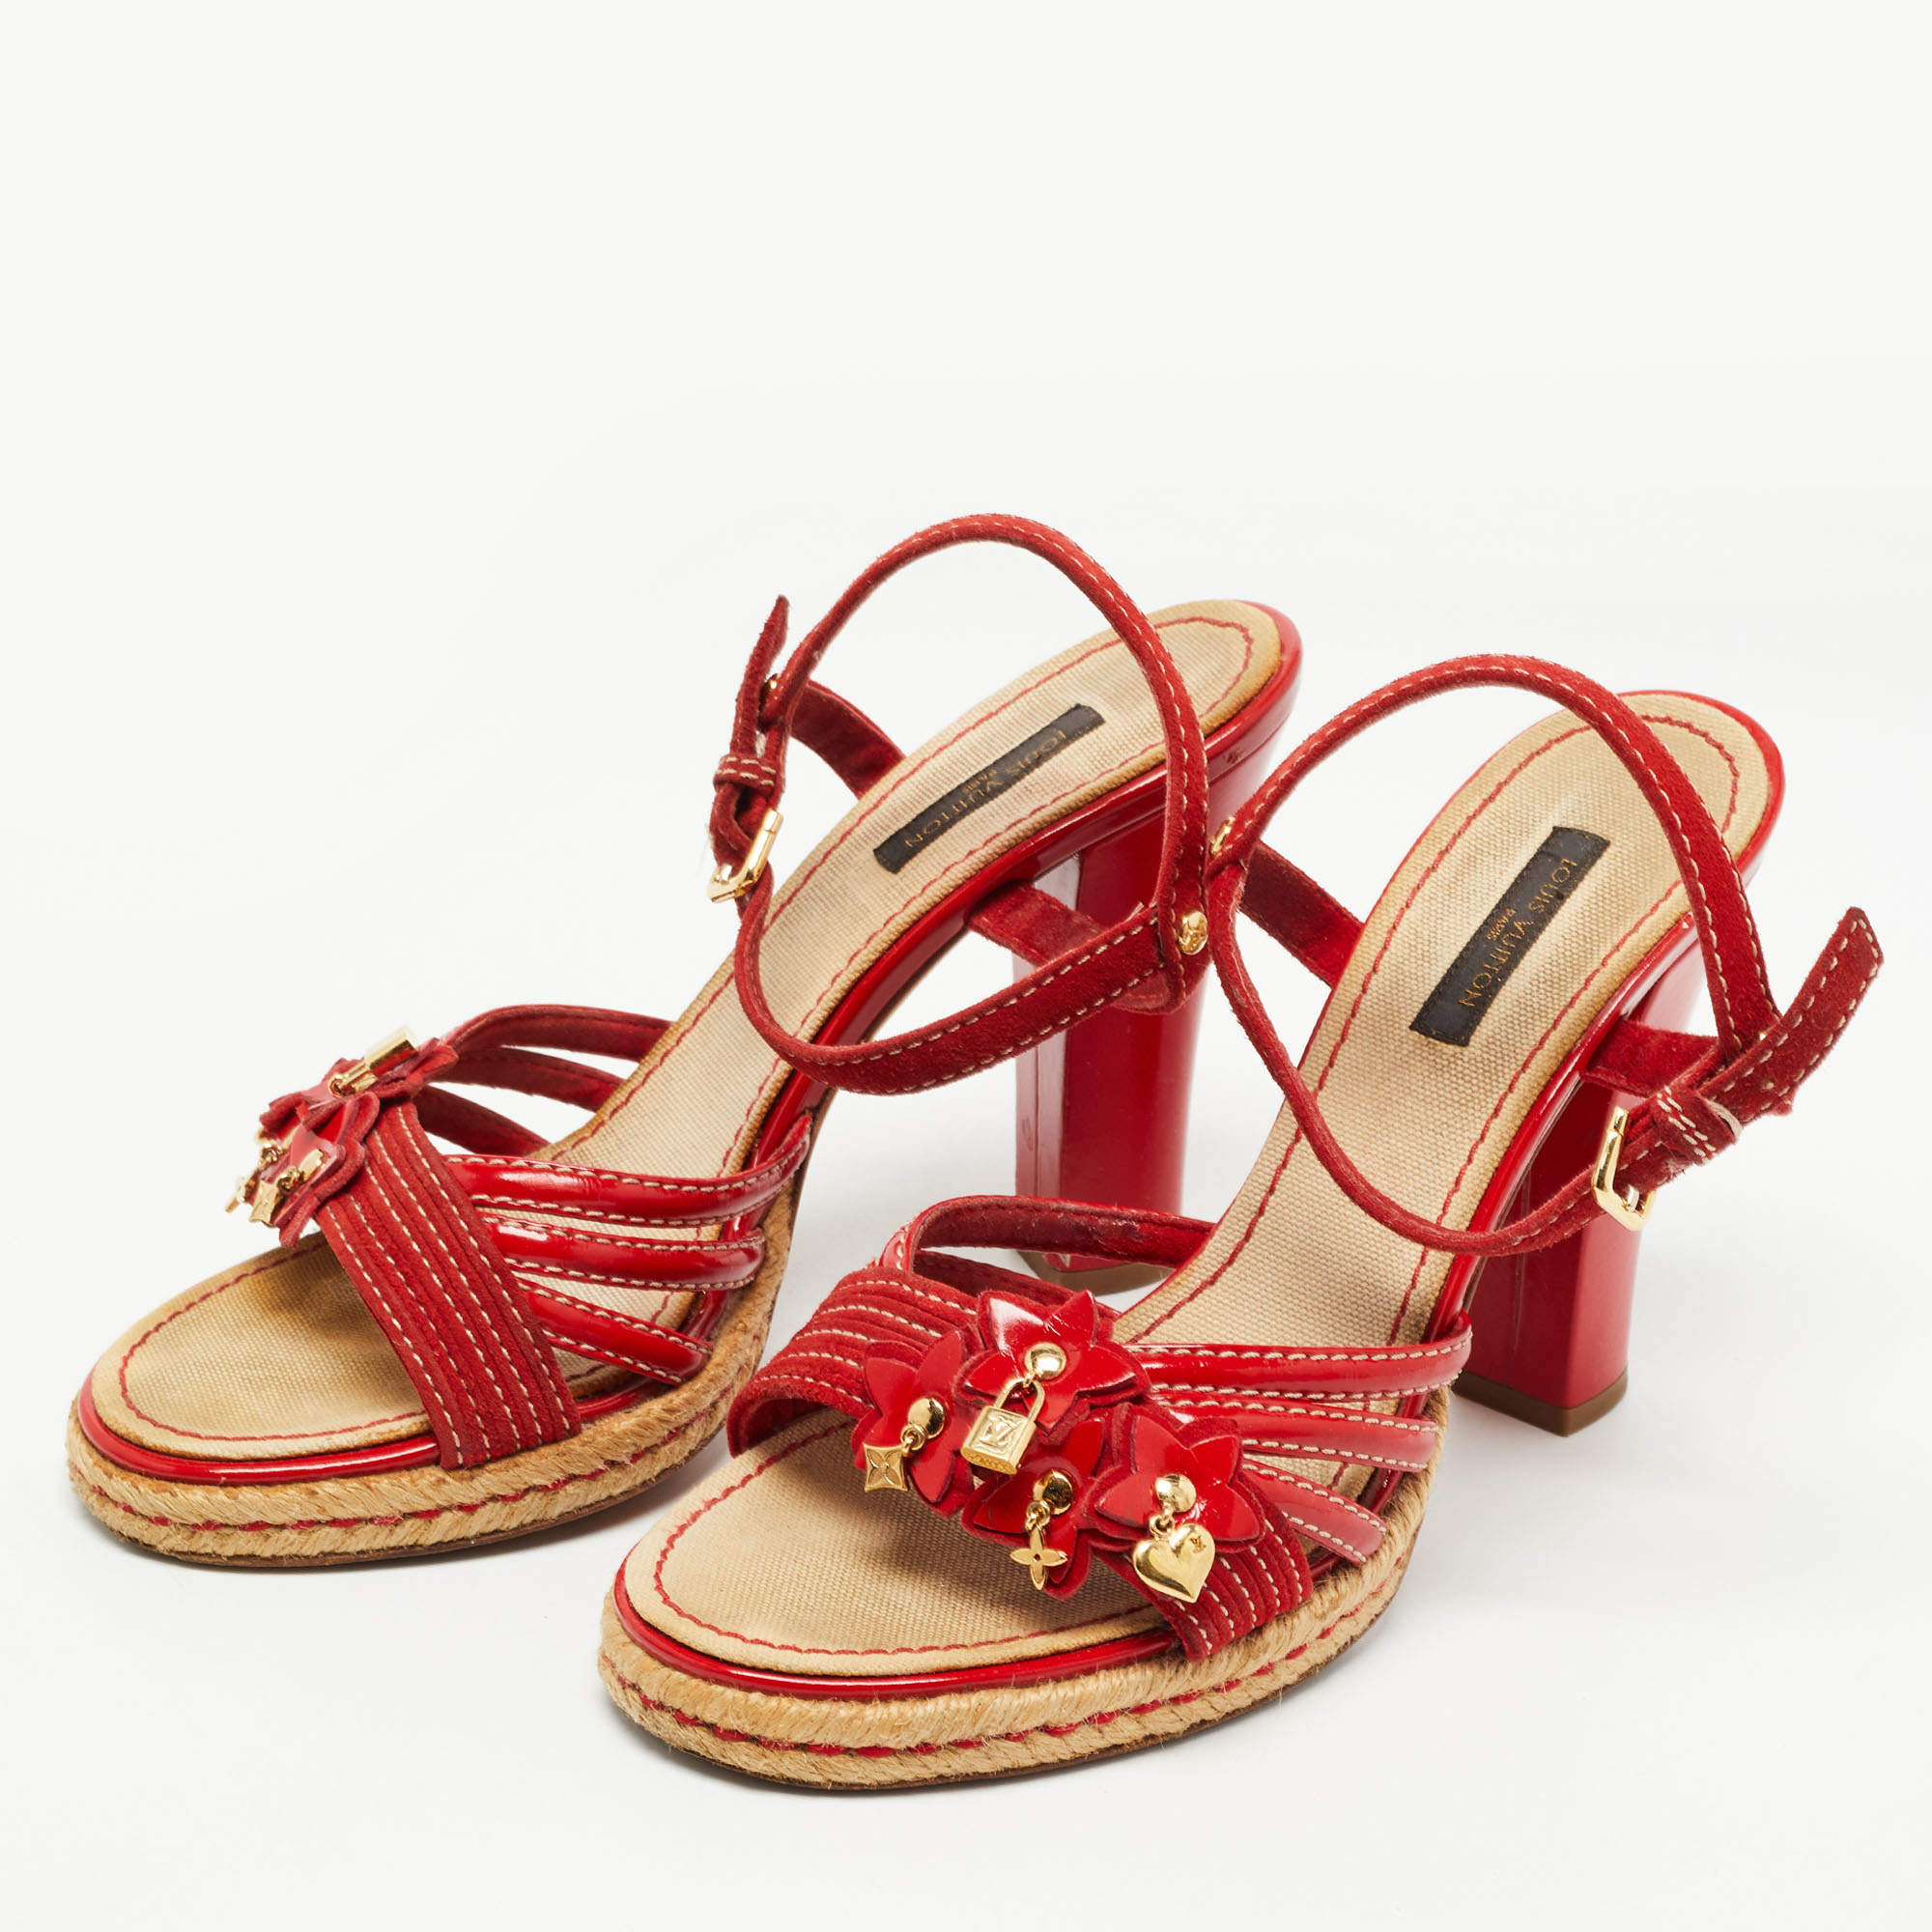 Louis Vuitton Red Suede and Patent Leather Ankle Strap Sandals